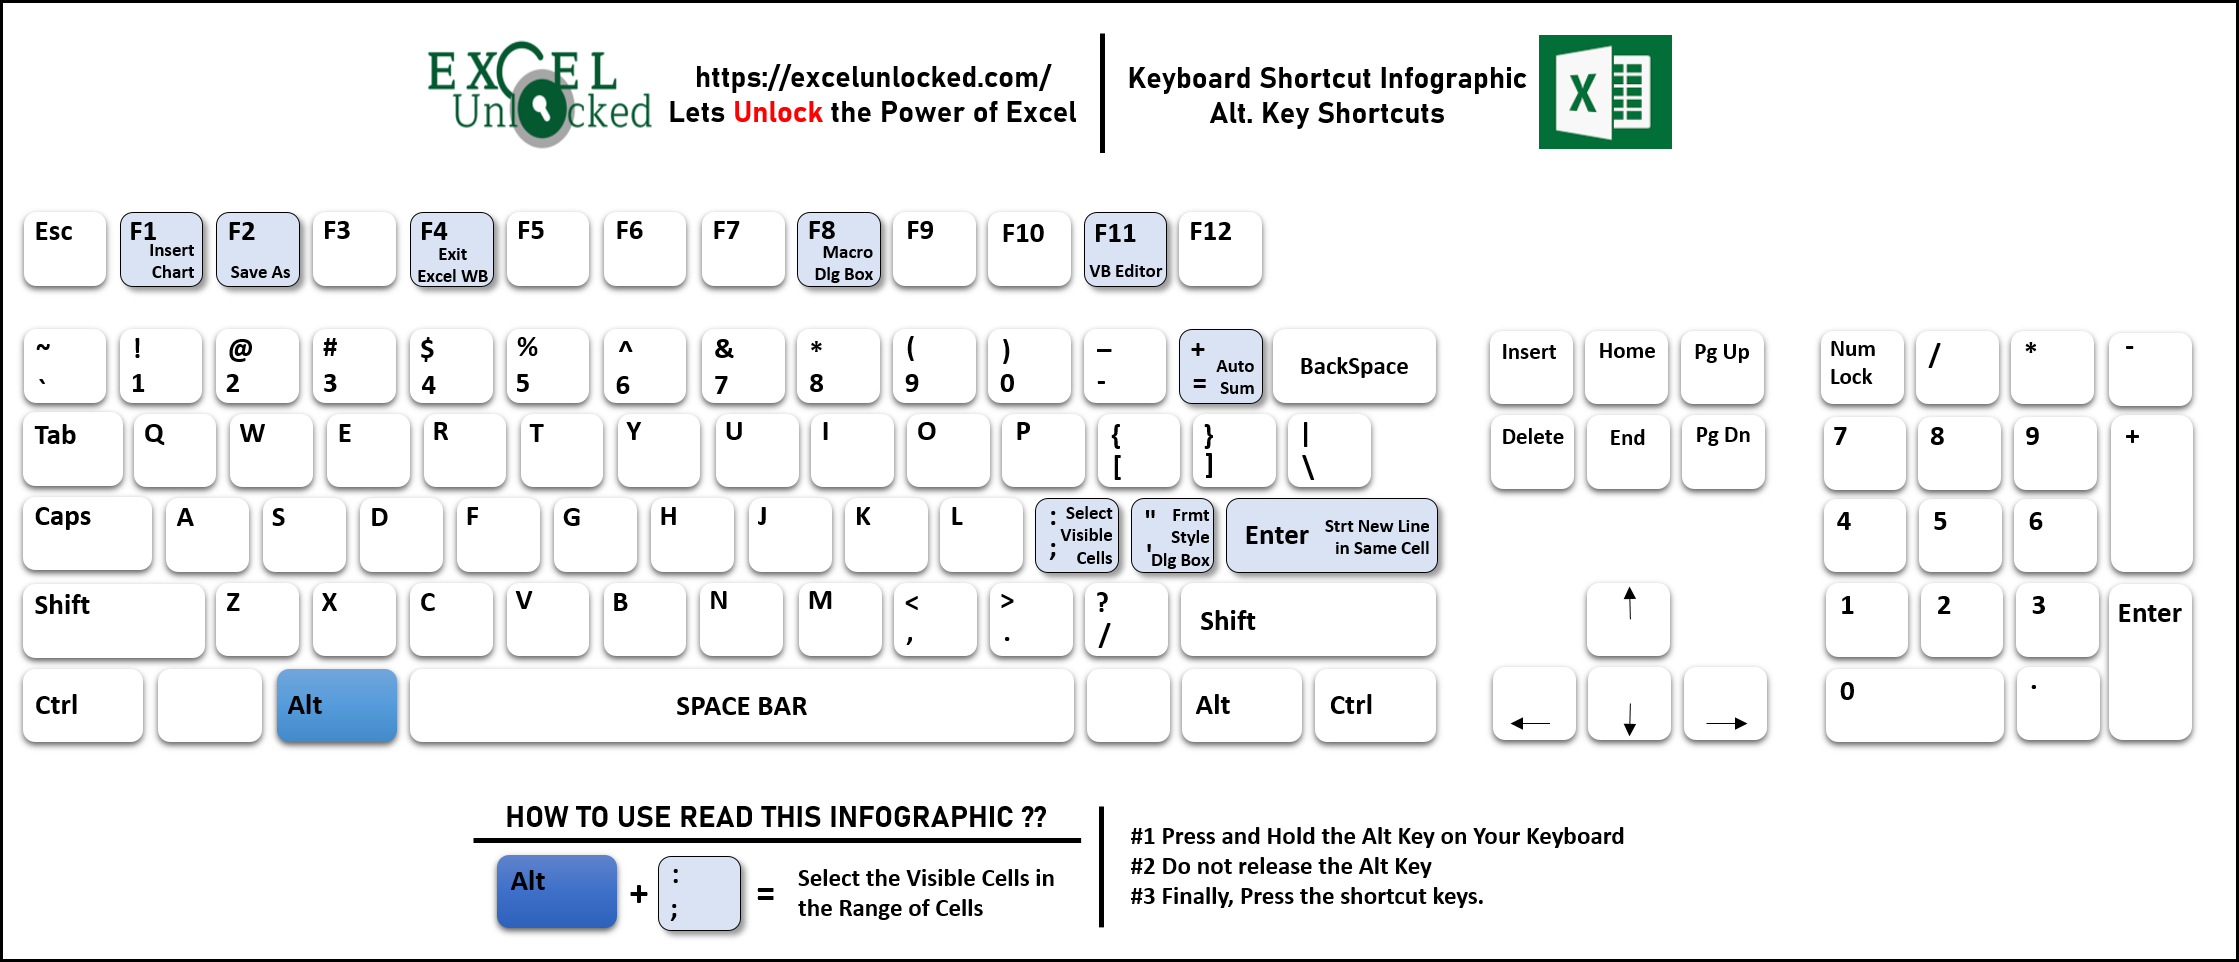 how to select entire column in excel keyboard shortcut